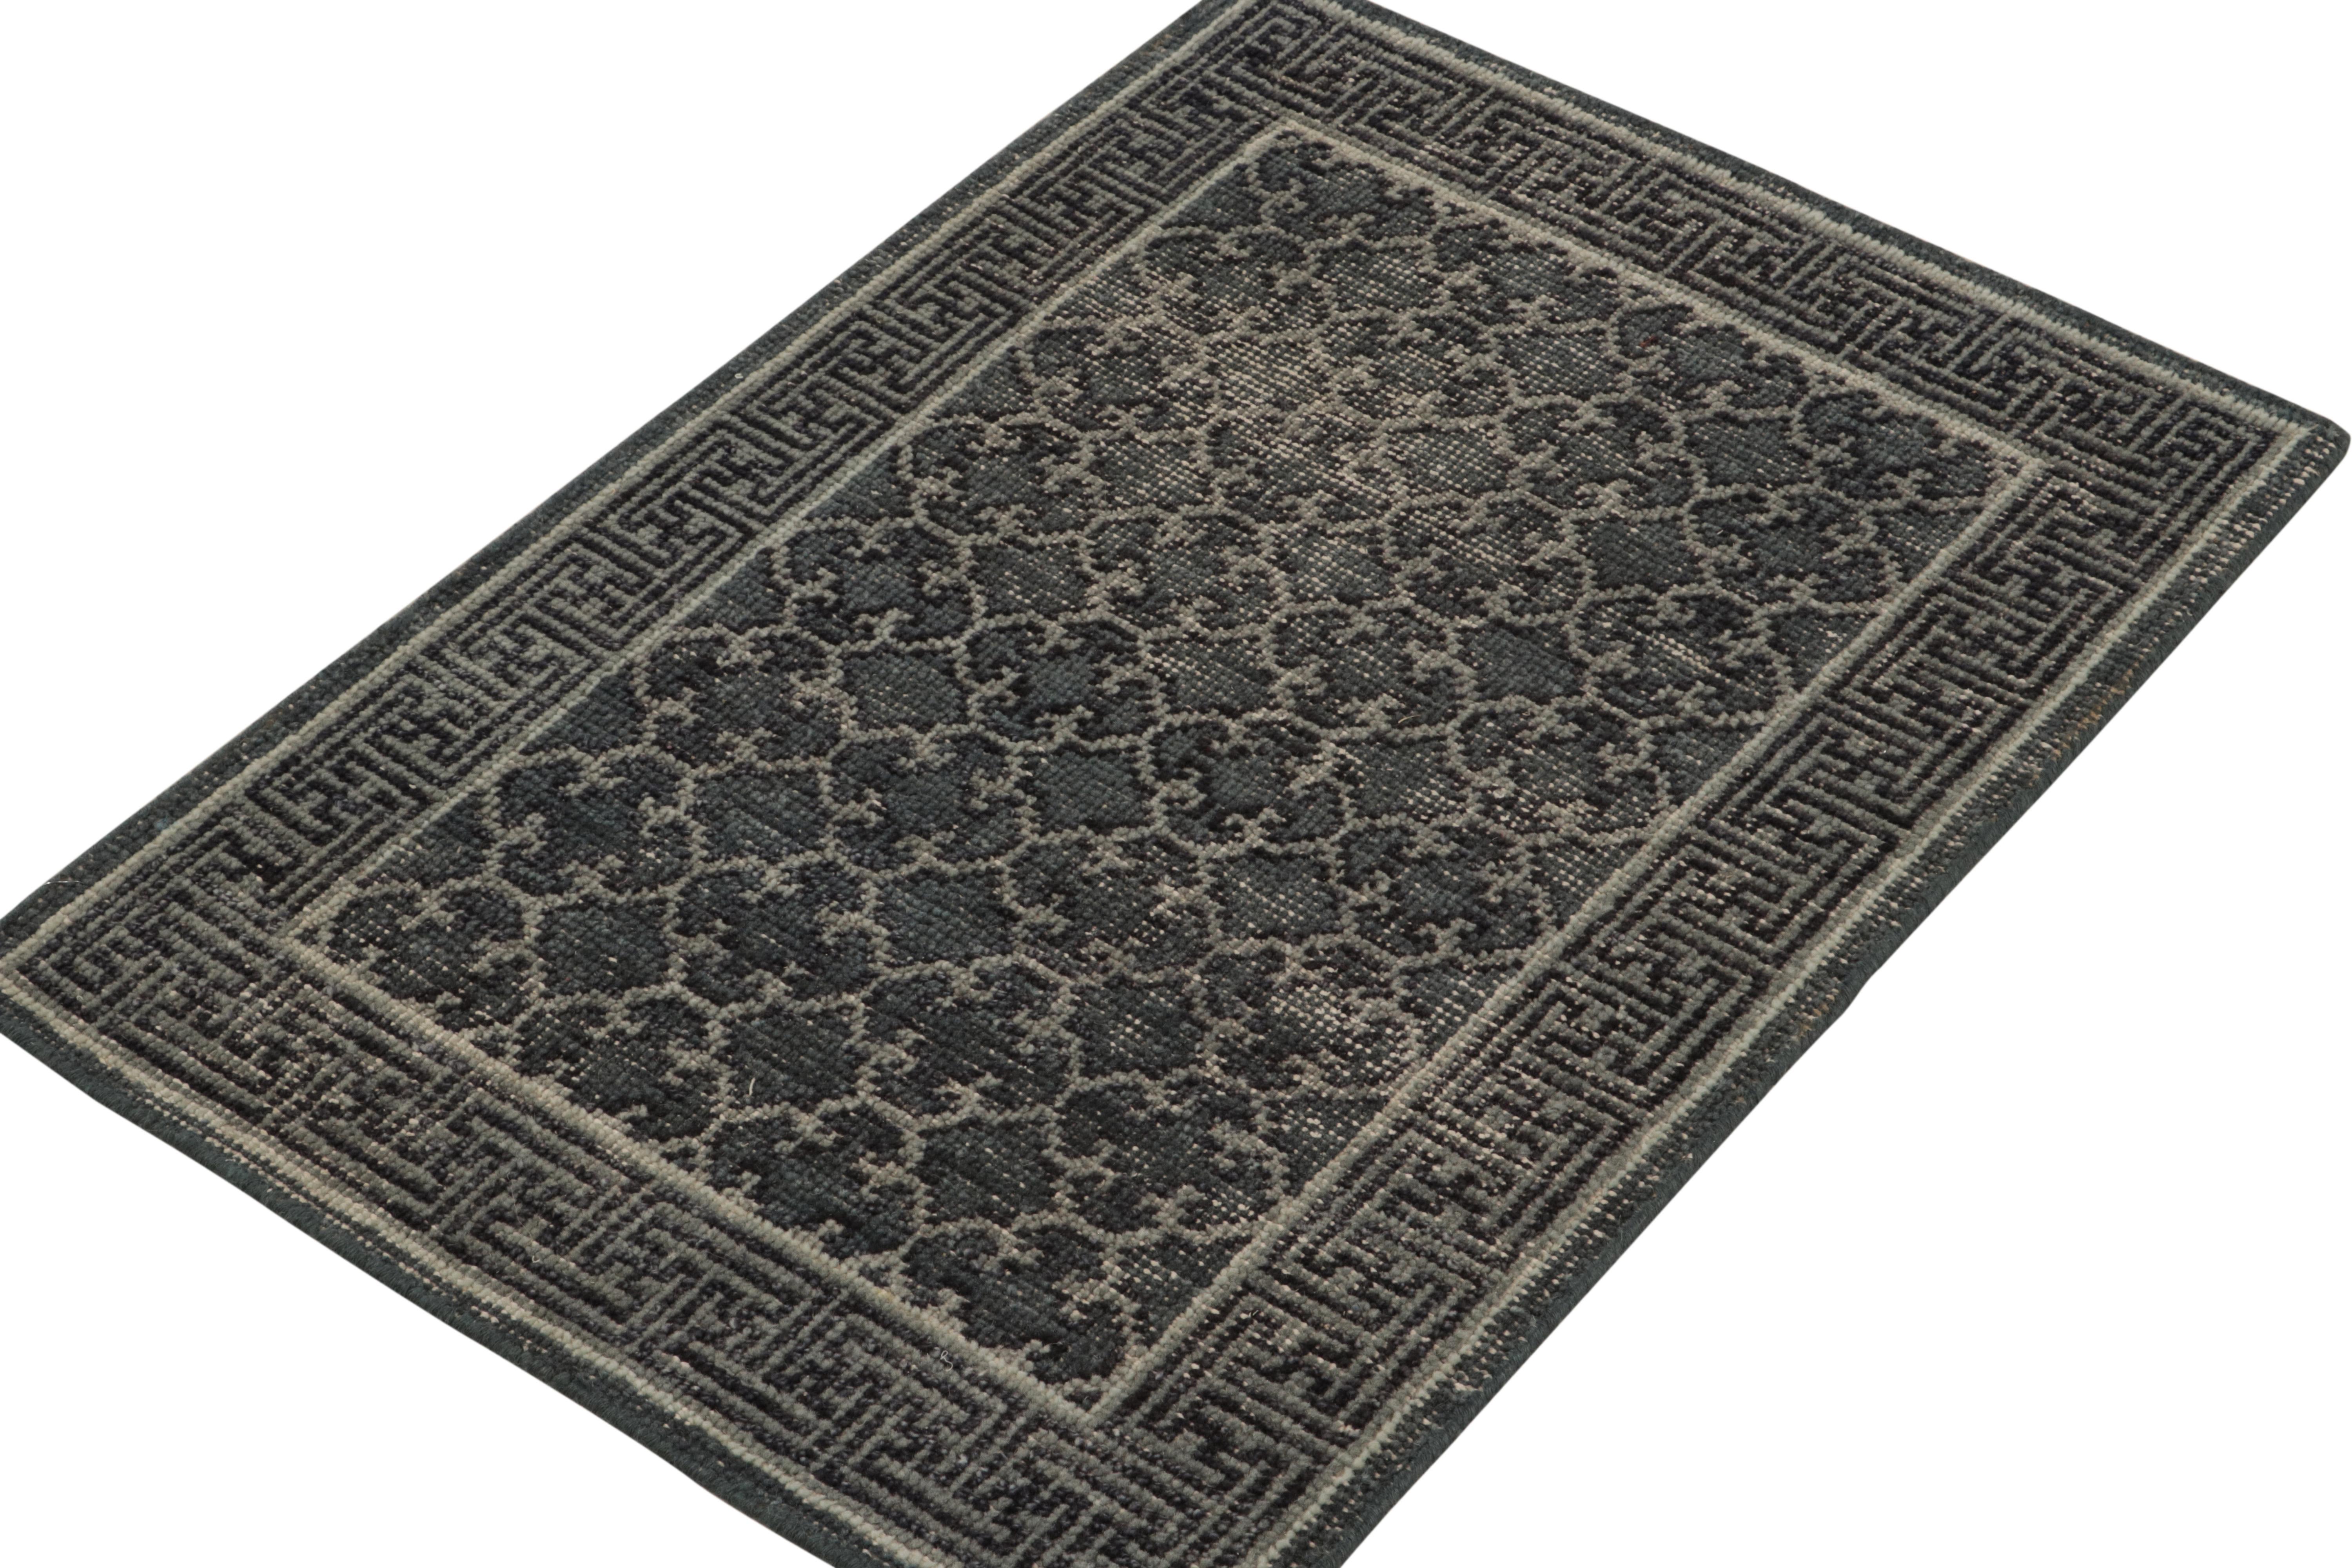 An elegant 2x3 hand-knotted wool rug from Rug & Kilim’s Homage Collection—a bold textural encyclopedia of celebrated patterns and styles. 

This classic style is inspired by antique Khotan Samarkand rugs of the early 20th century, reimagined in a